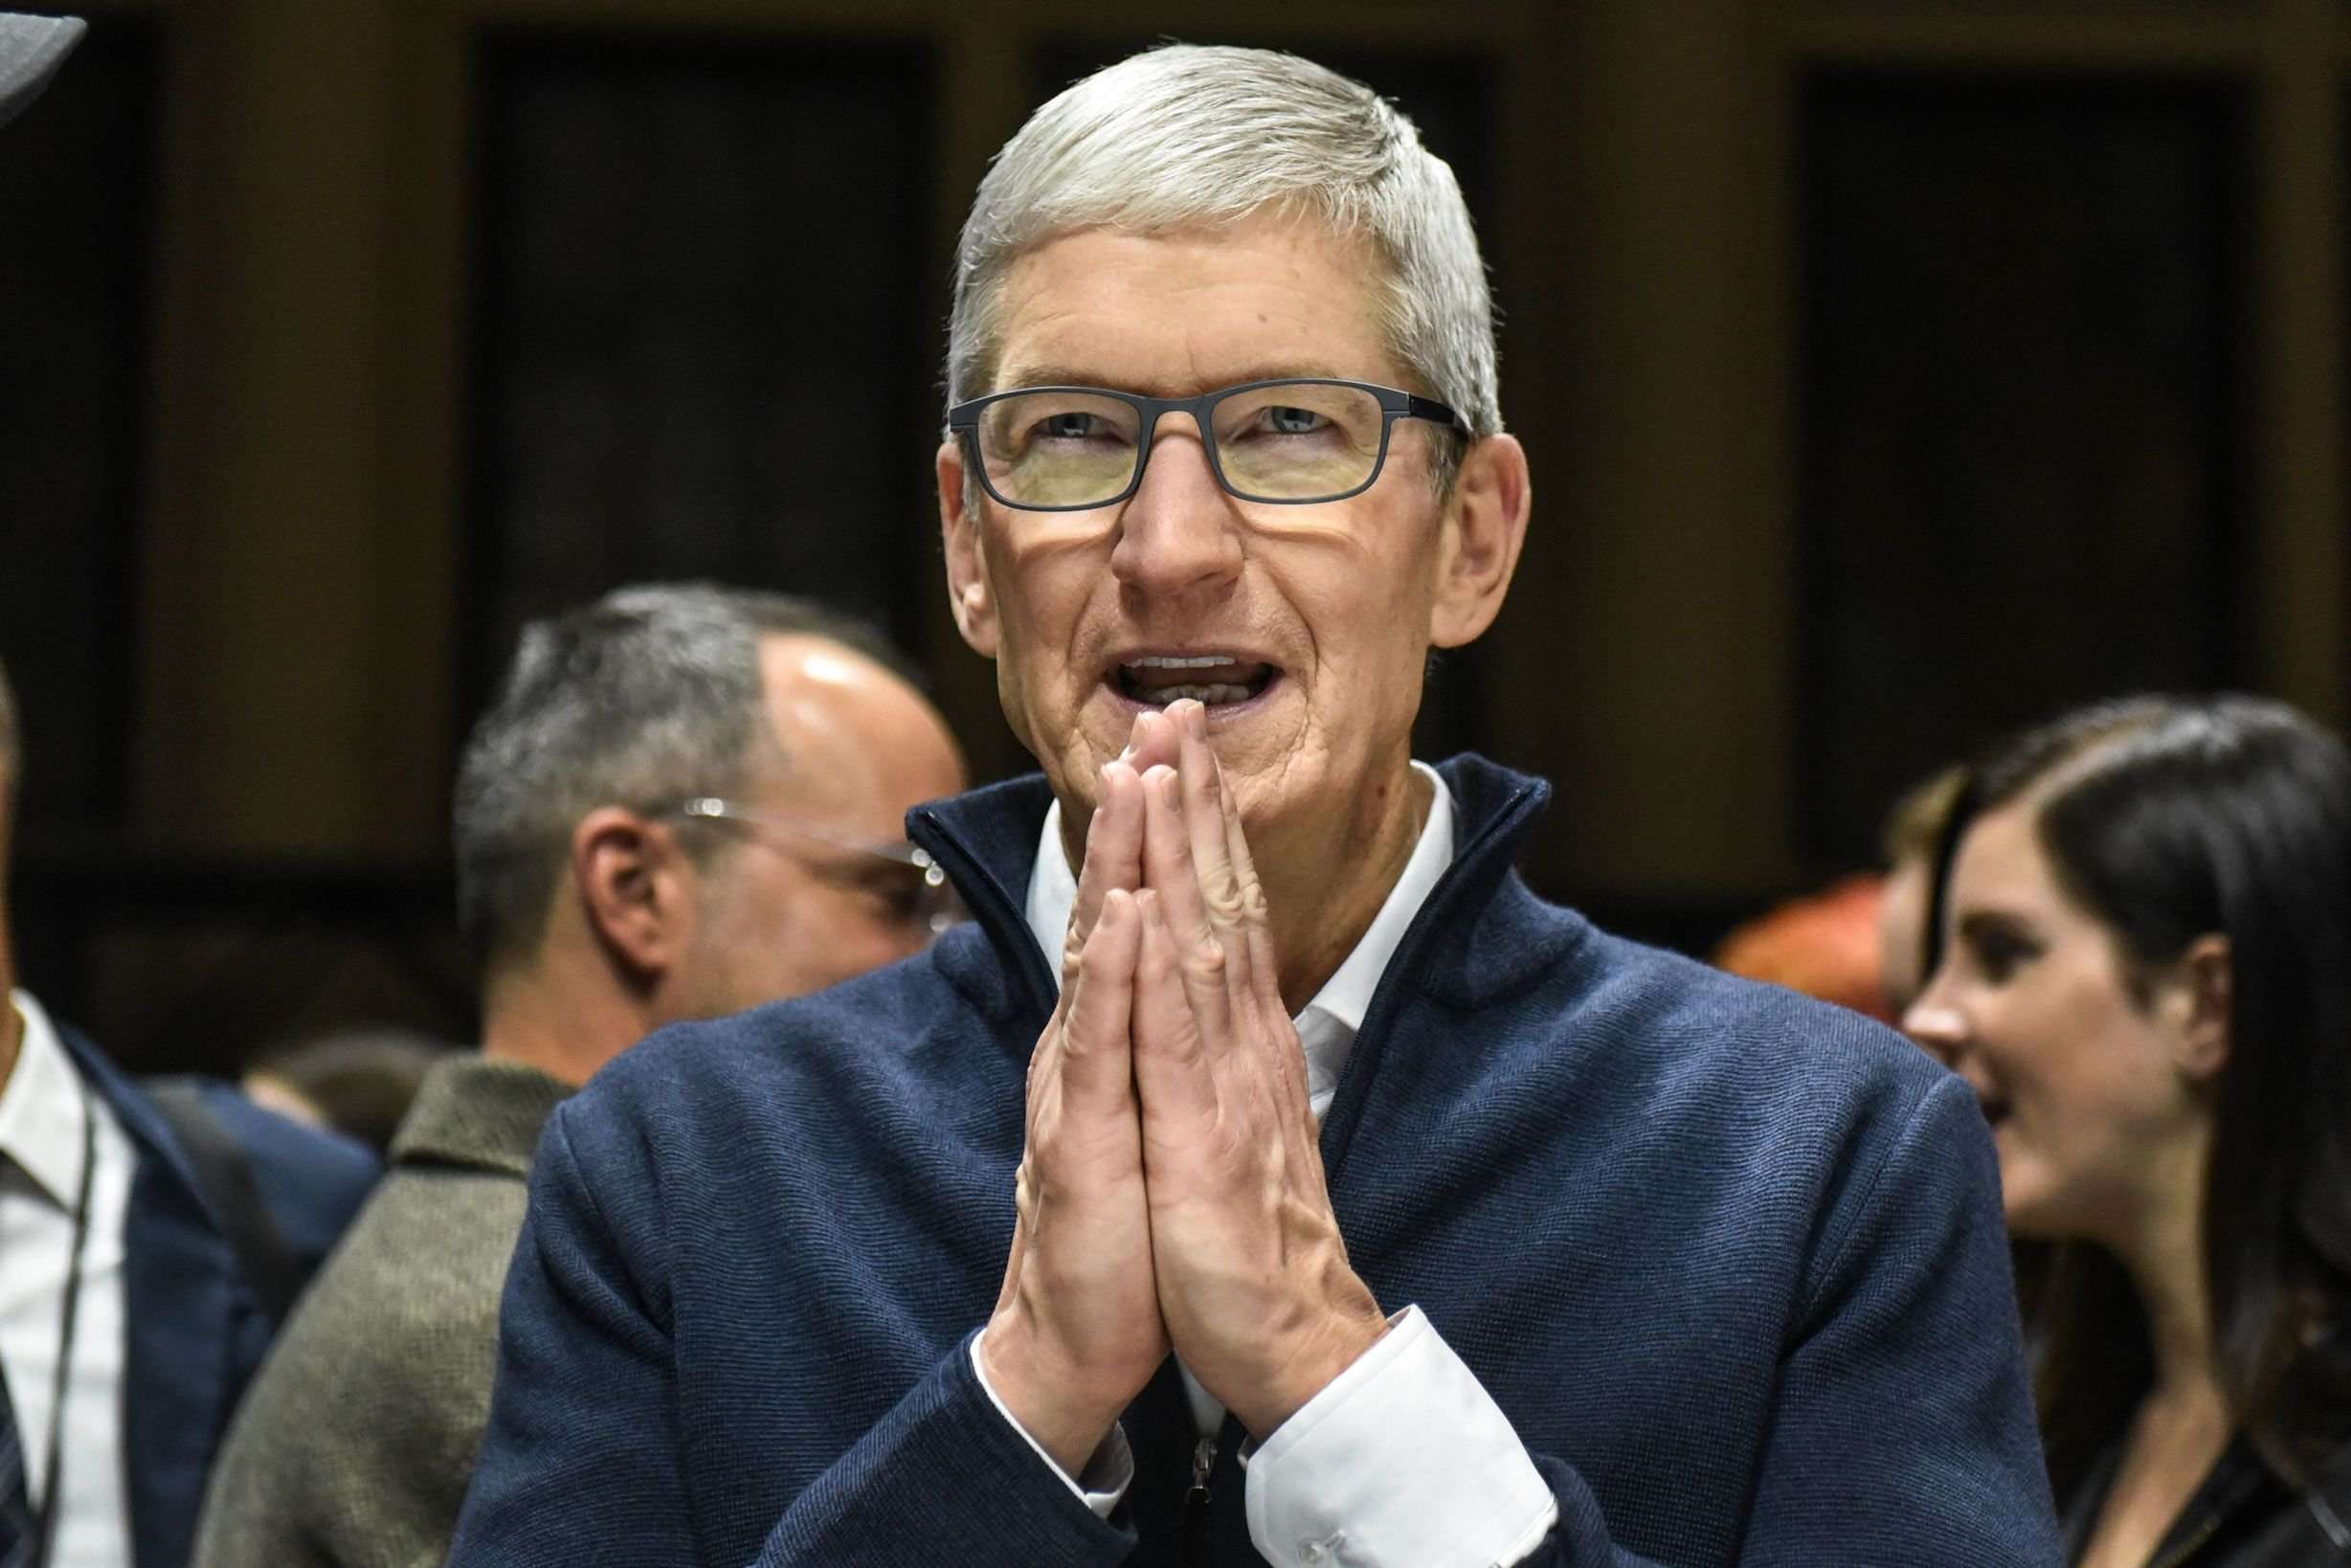 image for Apple CEO Tim Cook to the class of 2019: 'My generation has failed you'